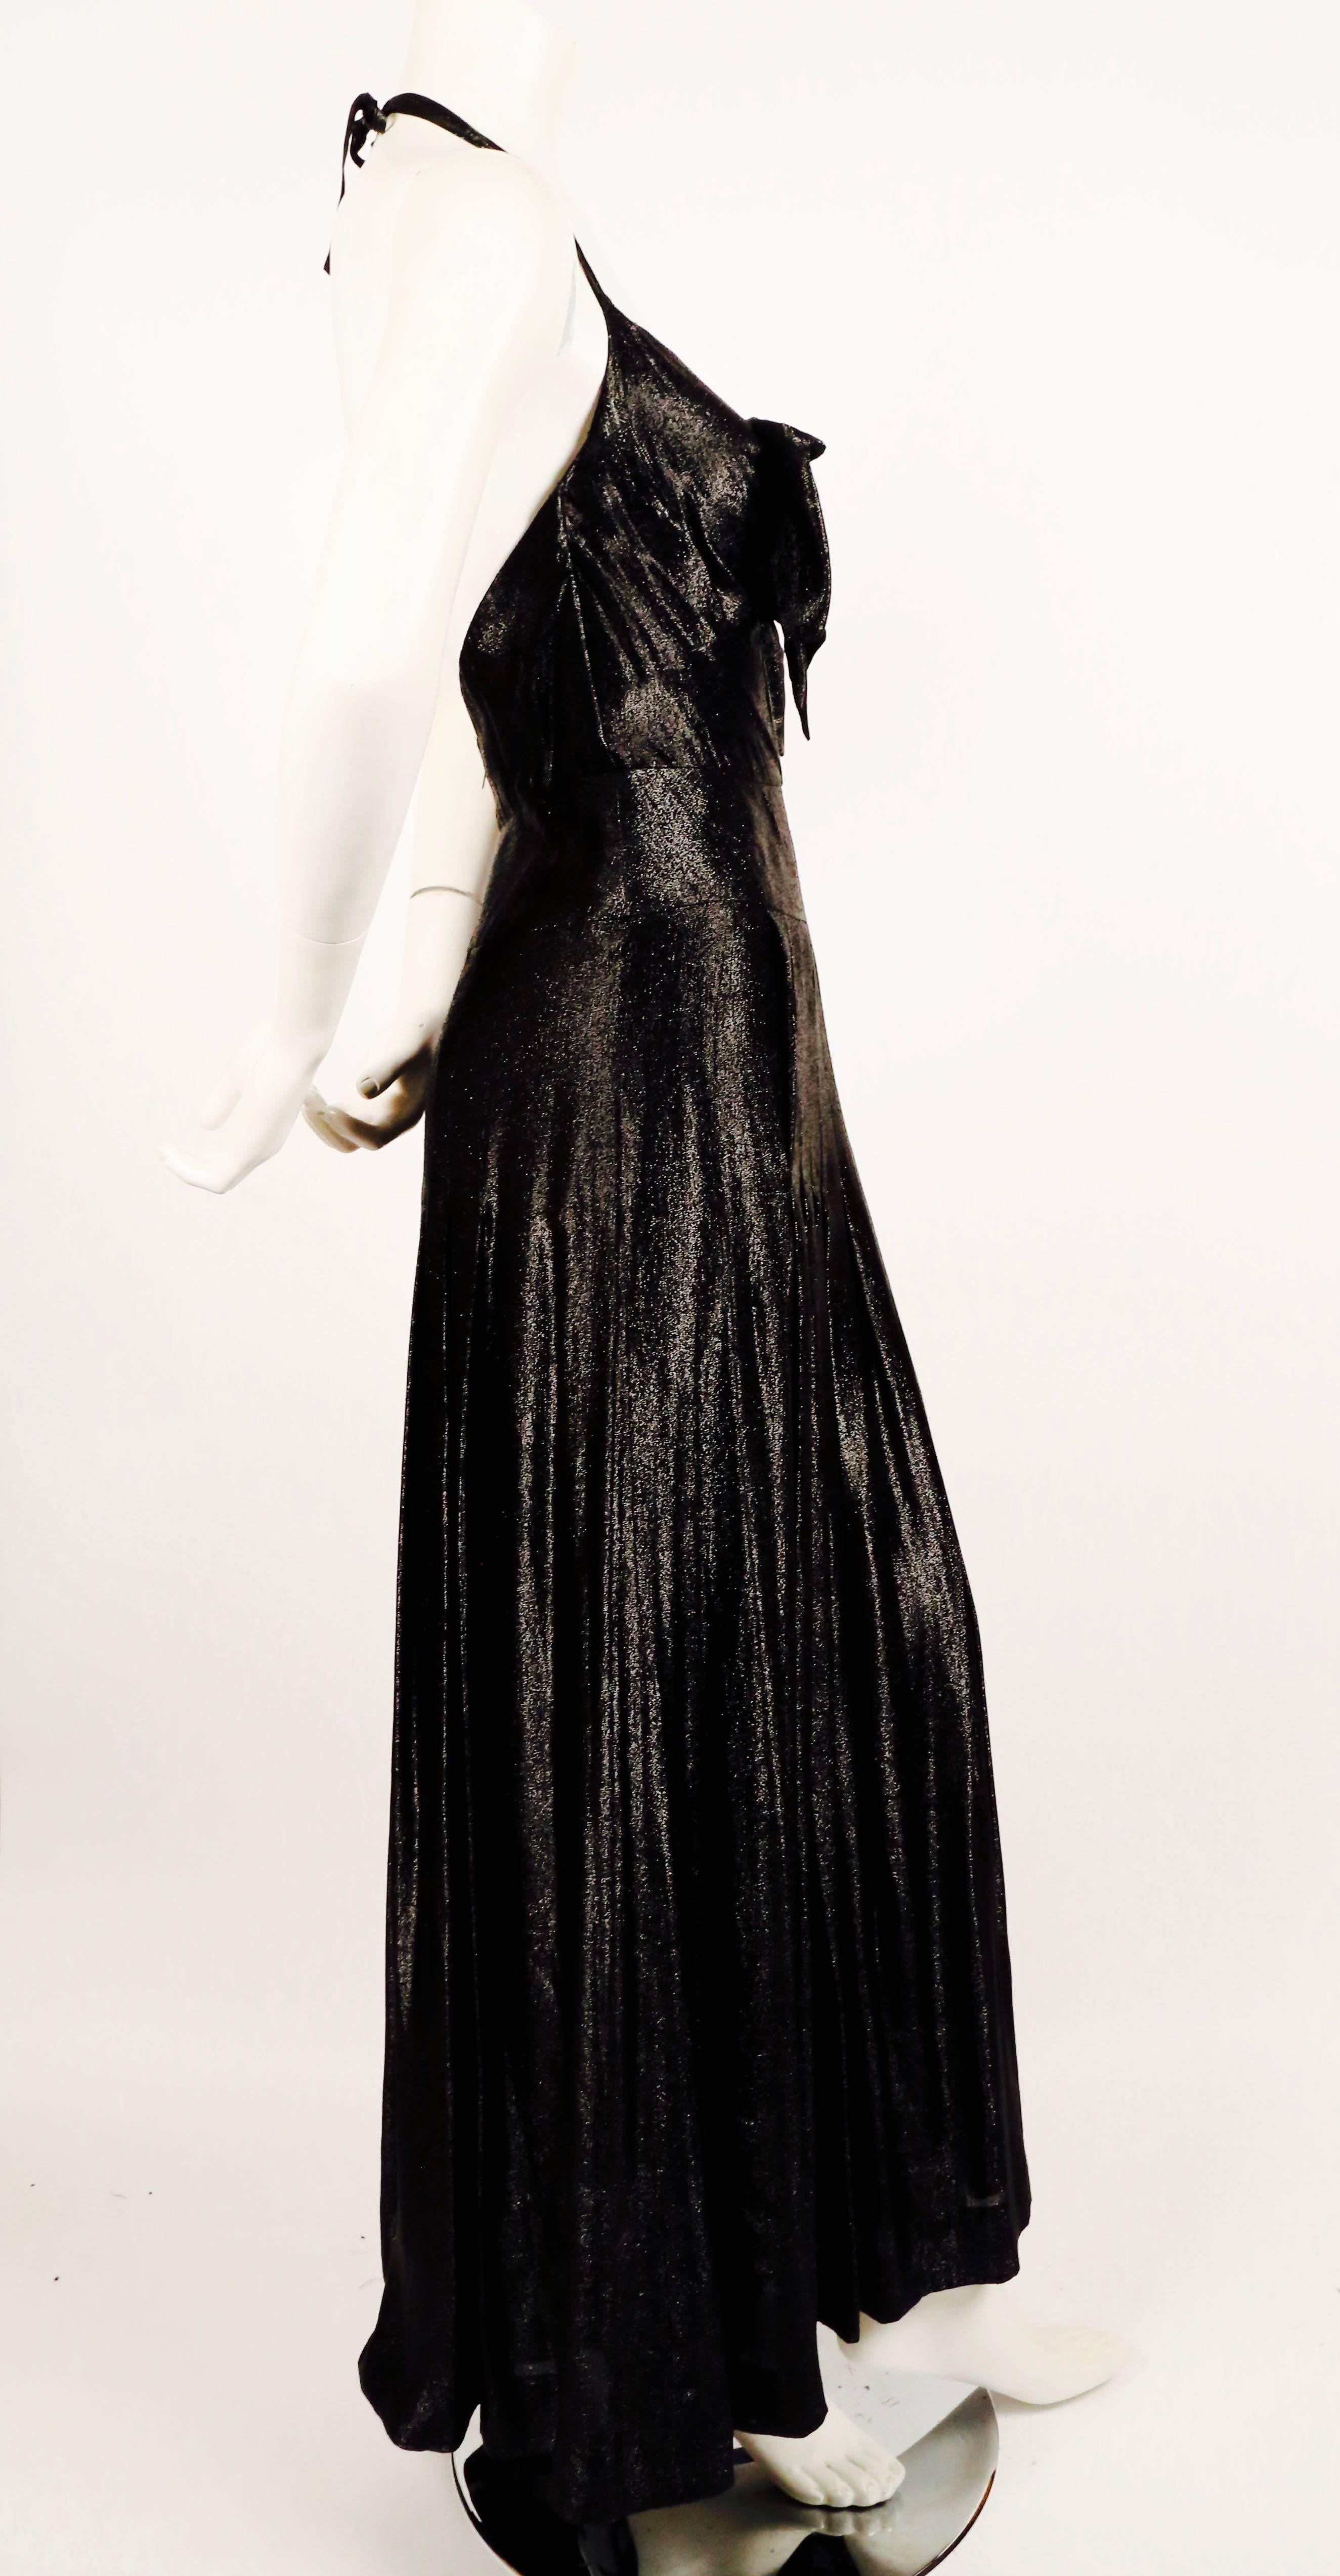 Metallic black silk floor length gown with pleated skirt and bow detail from Chanel dating to 1983 which was Karl Lagerfeld's first year at Chanel. Dress is labeled a French size 40 however it best fits a modern US 4 or 6. Approximate measurements: